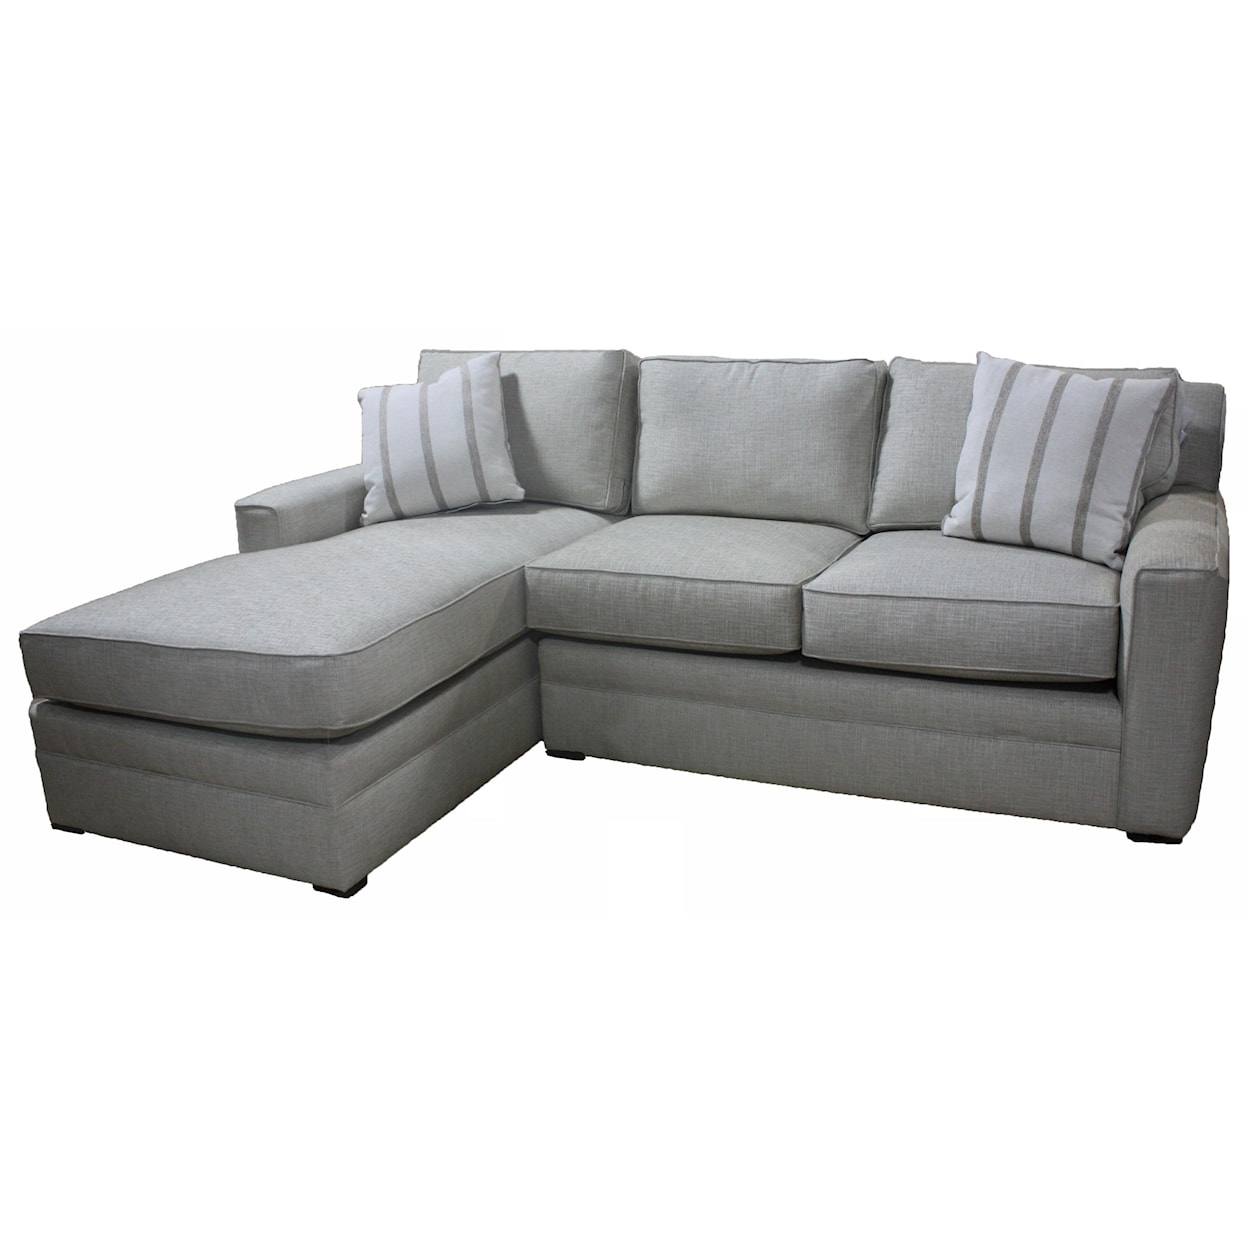 Stone & Leigh Furniture Riley 2 PC Sectional with a Chaise